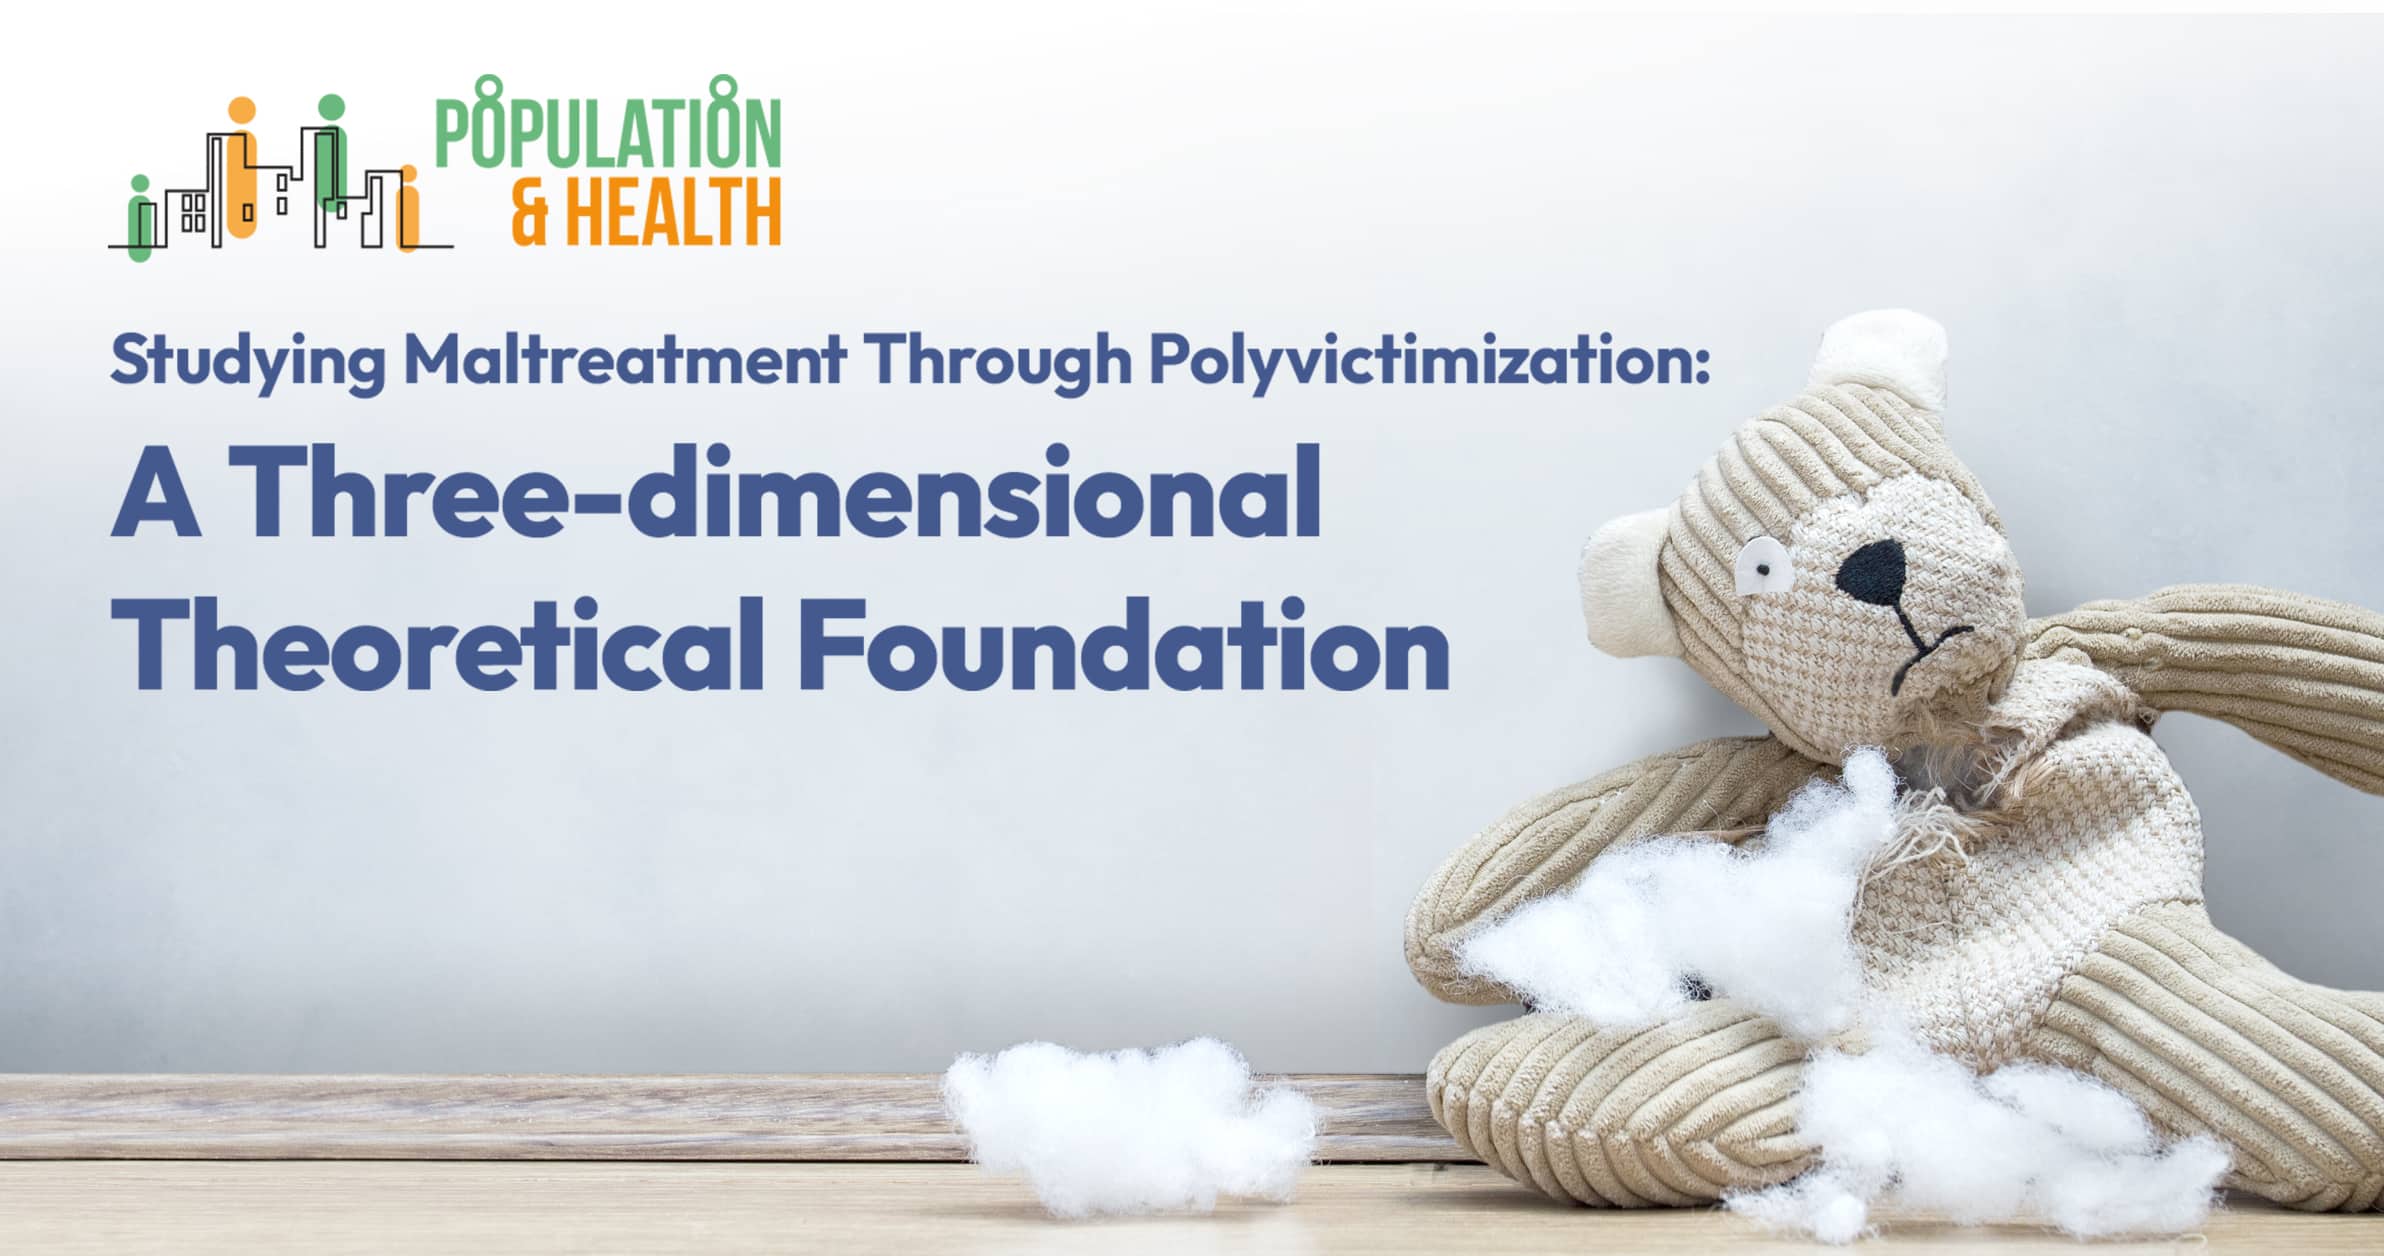 Studying Maltreatment Through Polyvictimization: A Three-dimensional Theoretical Foundation